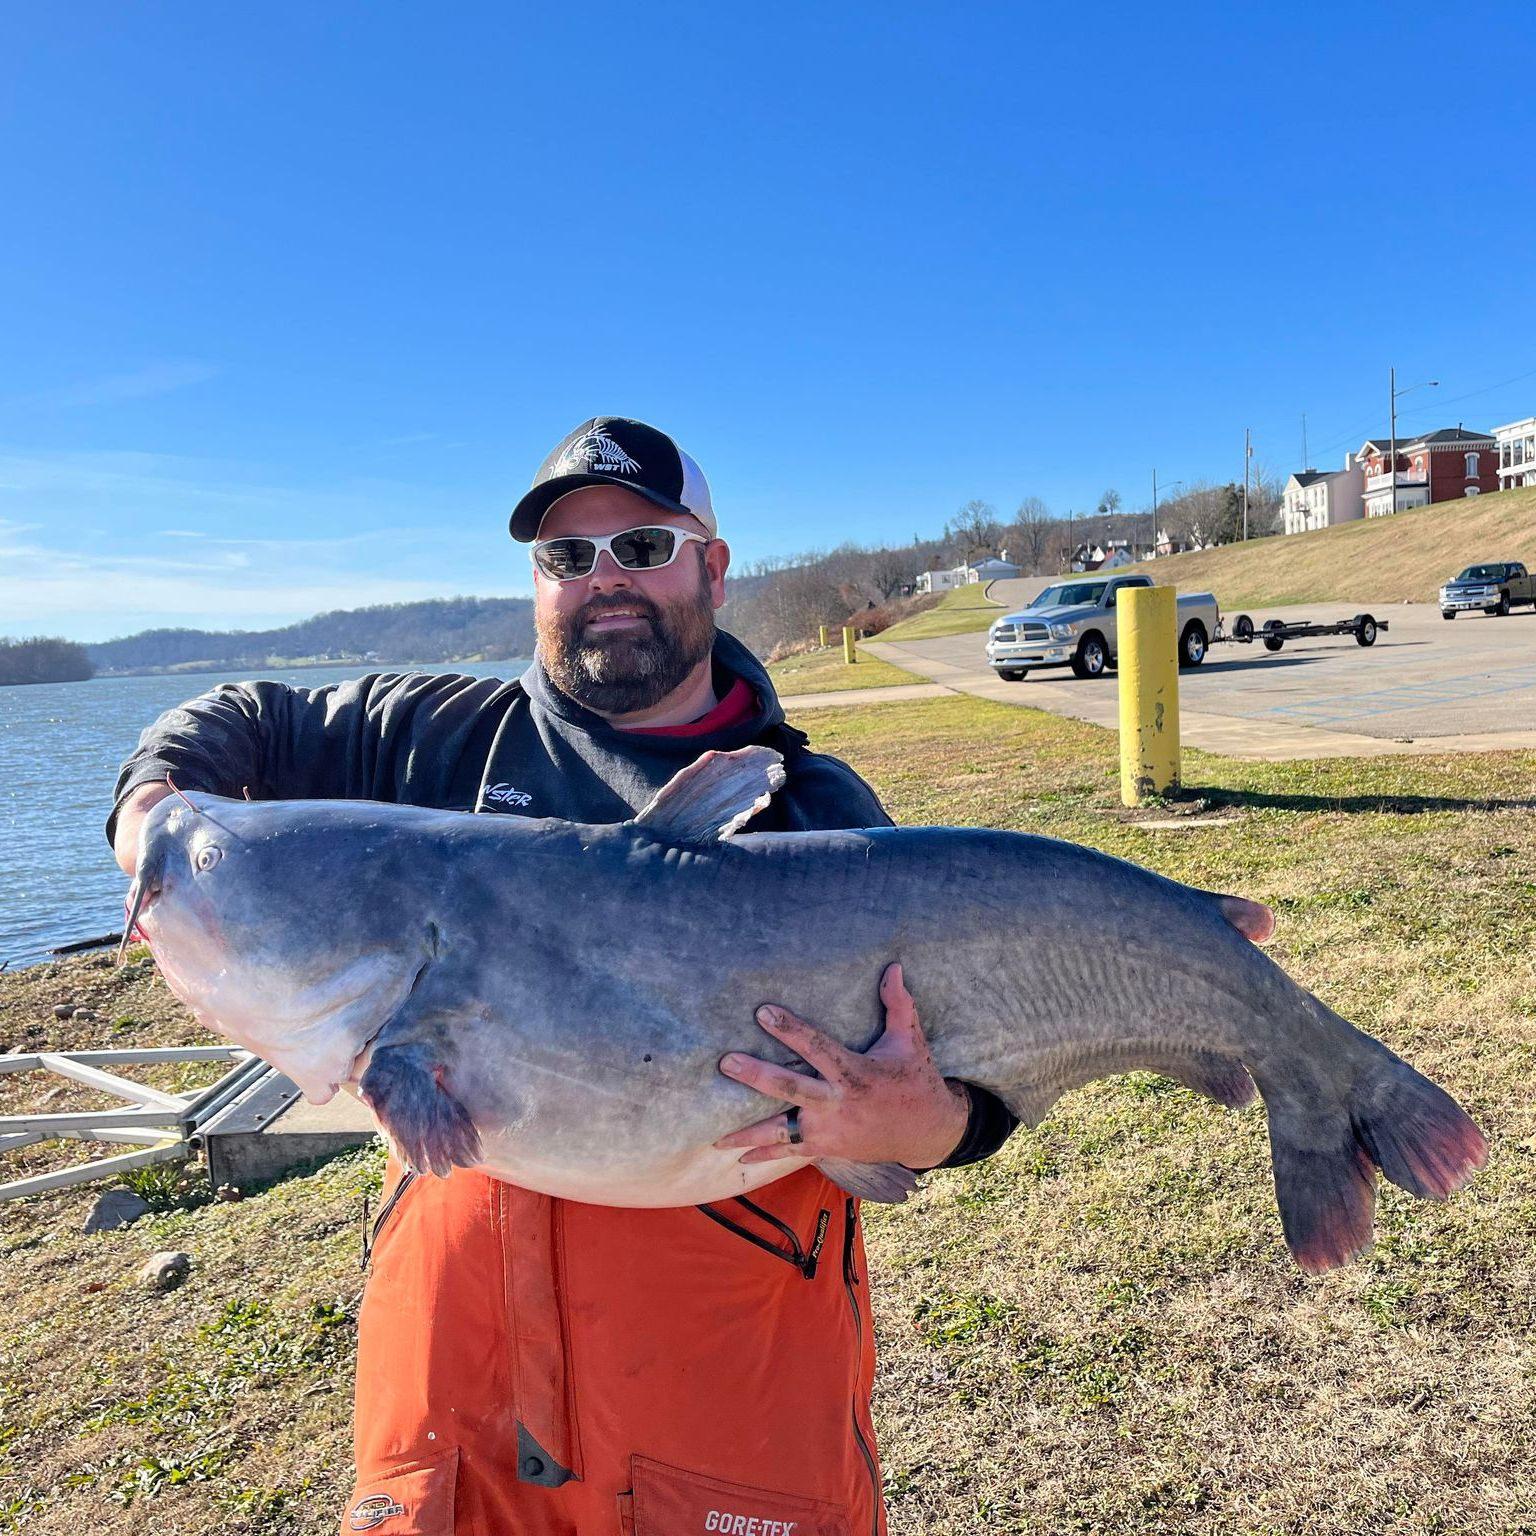 Gov. Justice, WVDNR announce blue catfish state record broken again in West Virginia